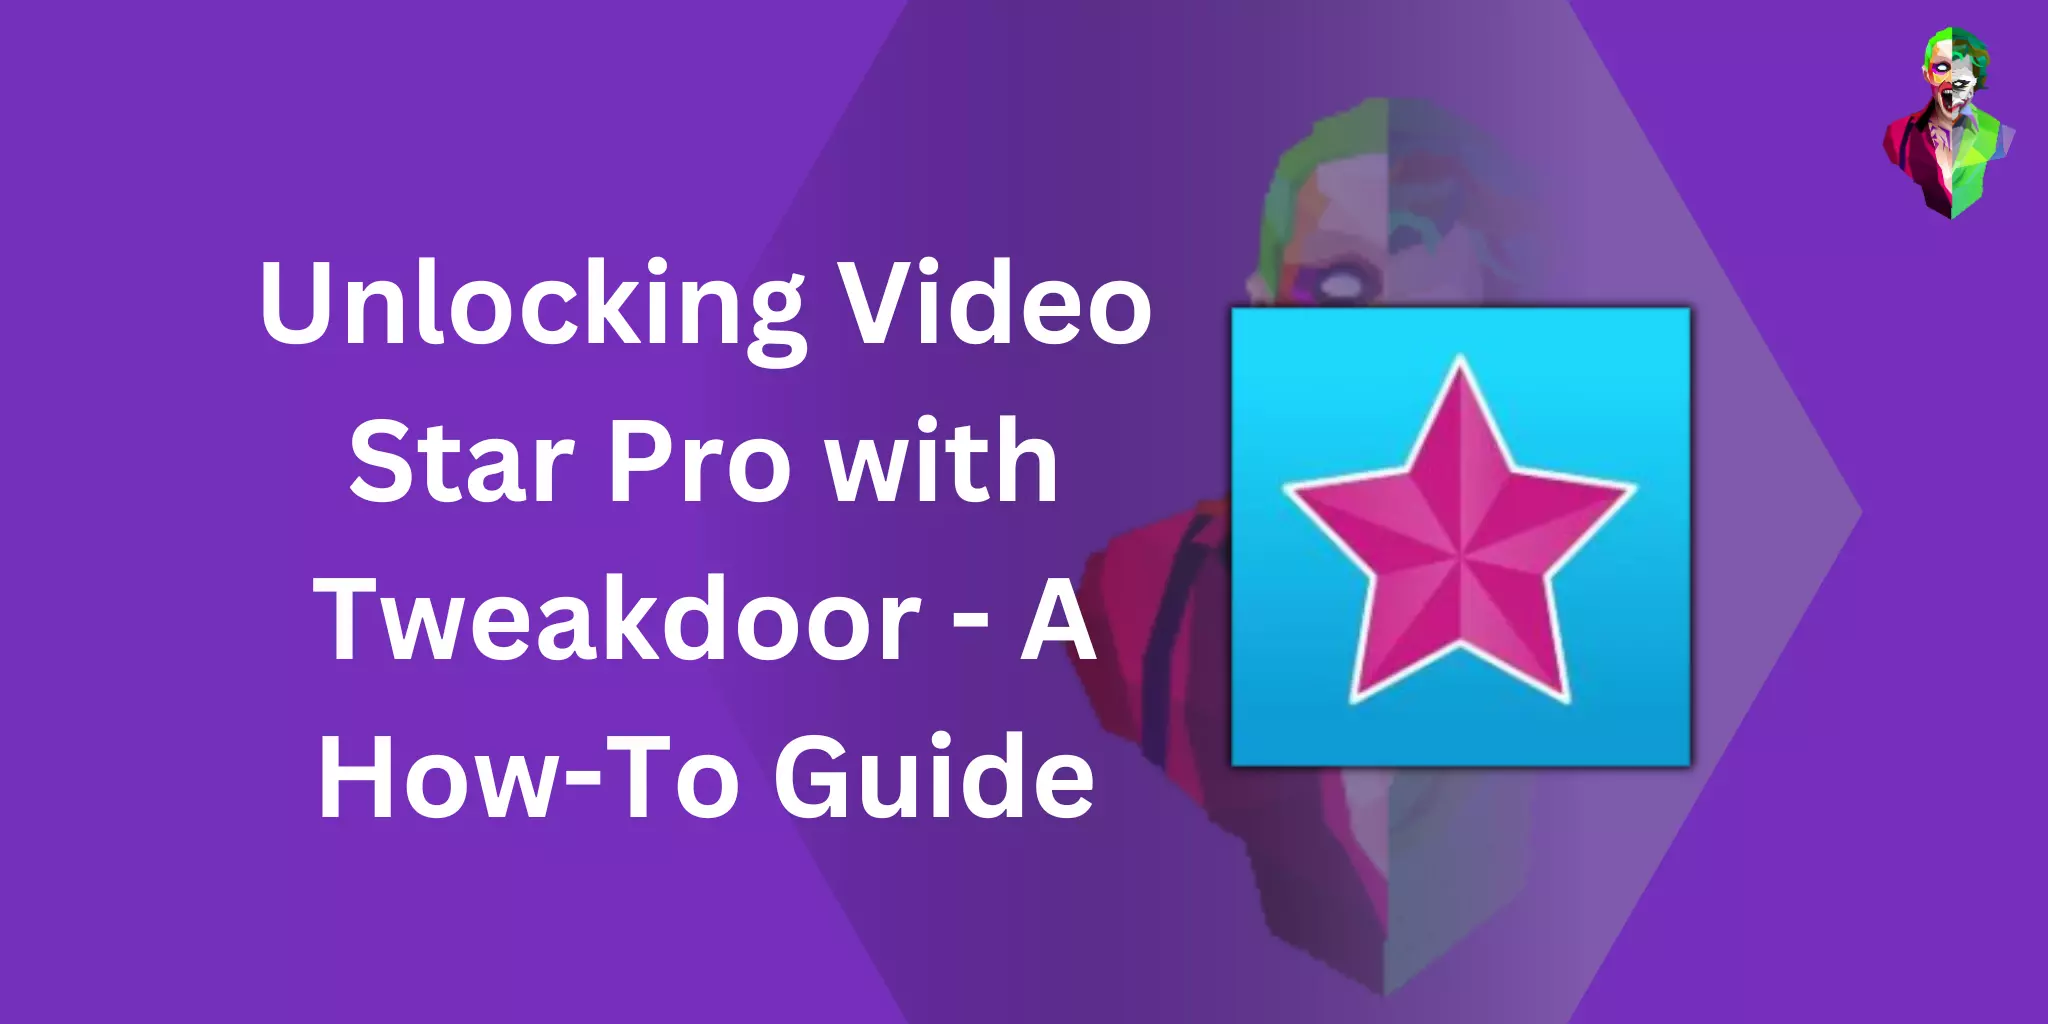 Unlocking Video Star Pro with Tweakdoor – A How-To Guide